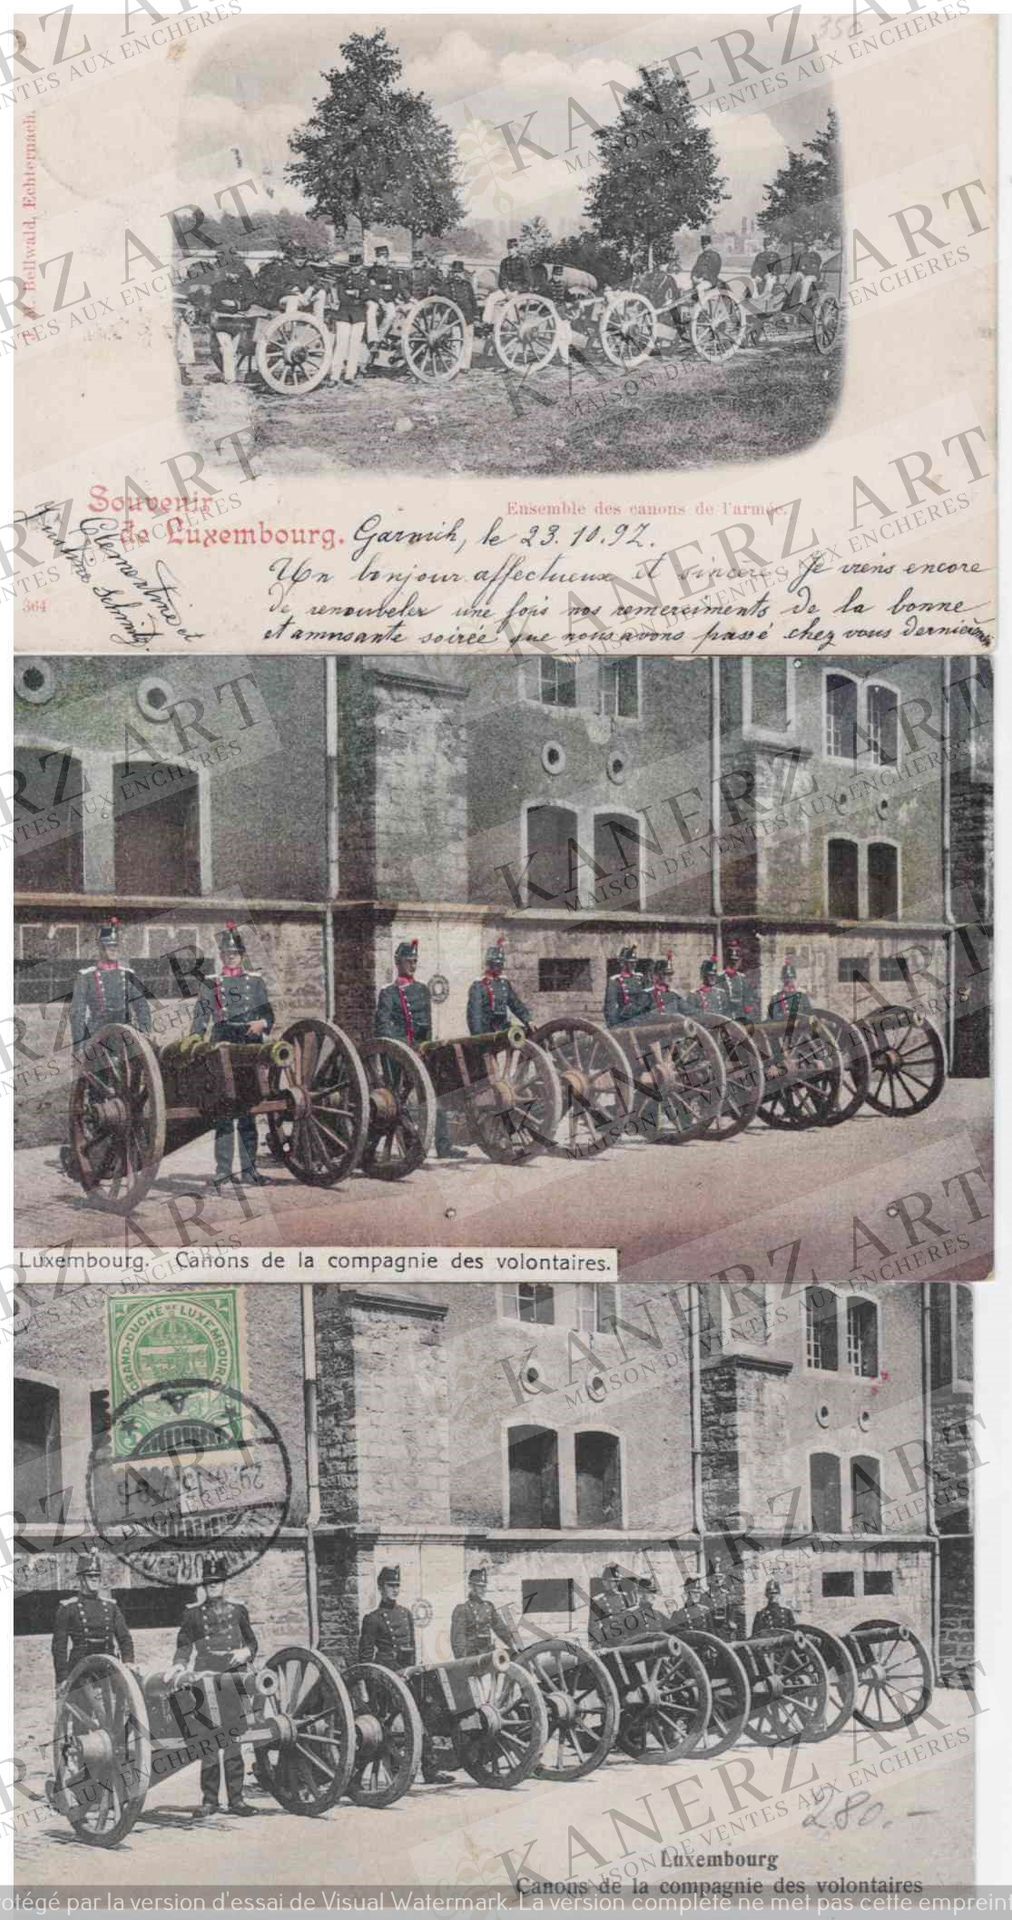 Null (WAR I) 4 cards on the guns of the volunteer company: 1. Souvenir de Luxemb&hellip;